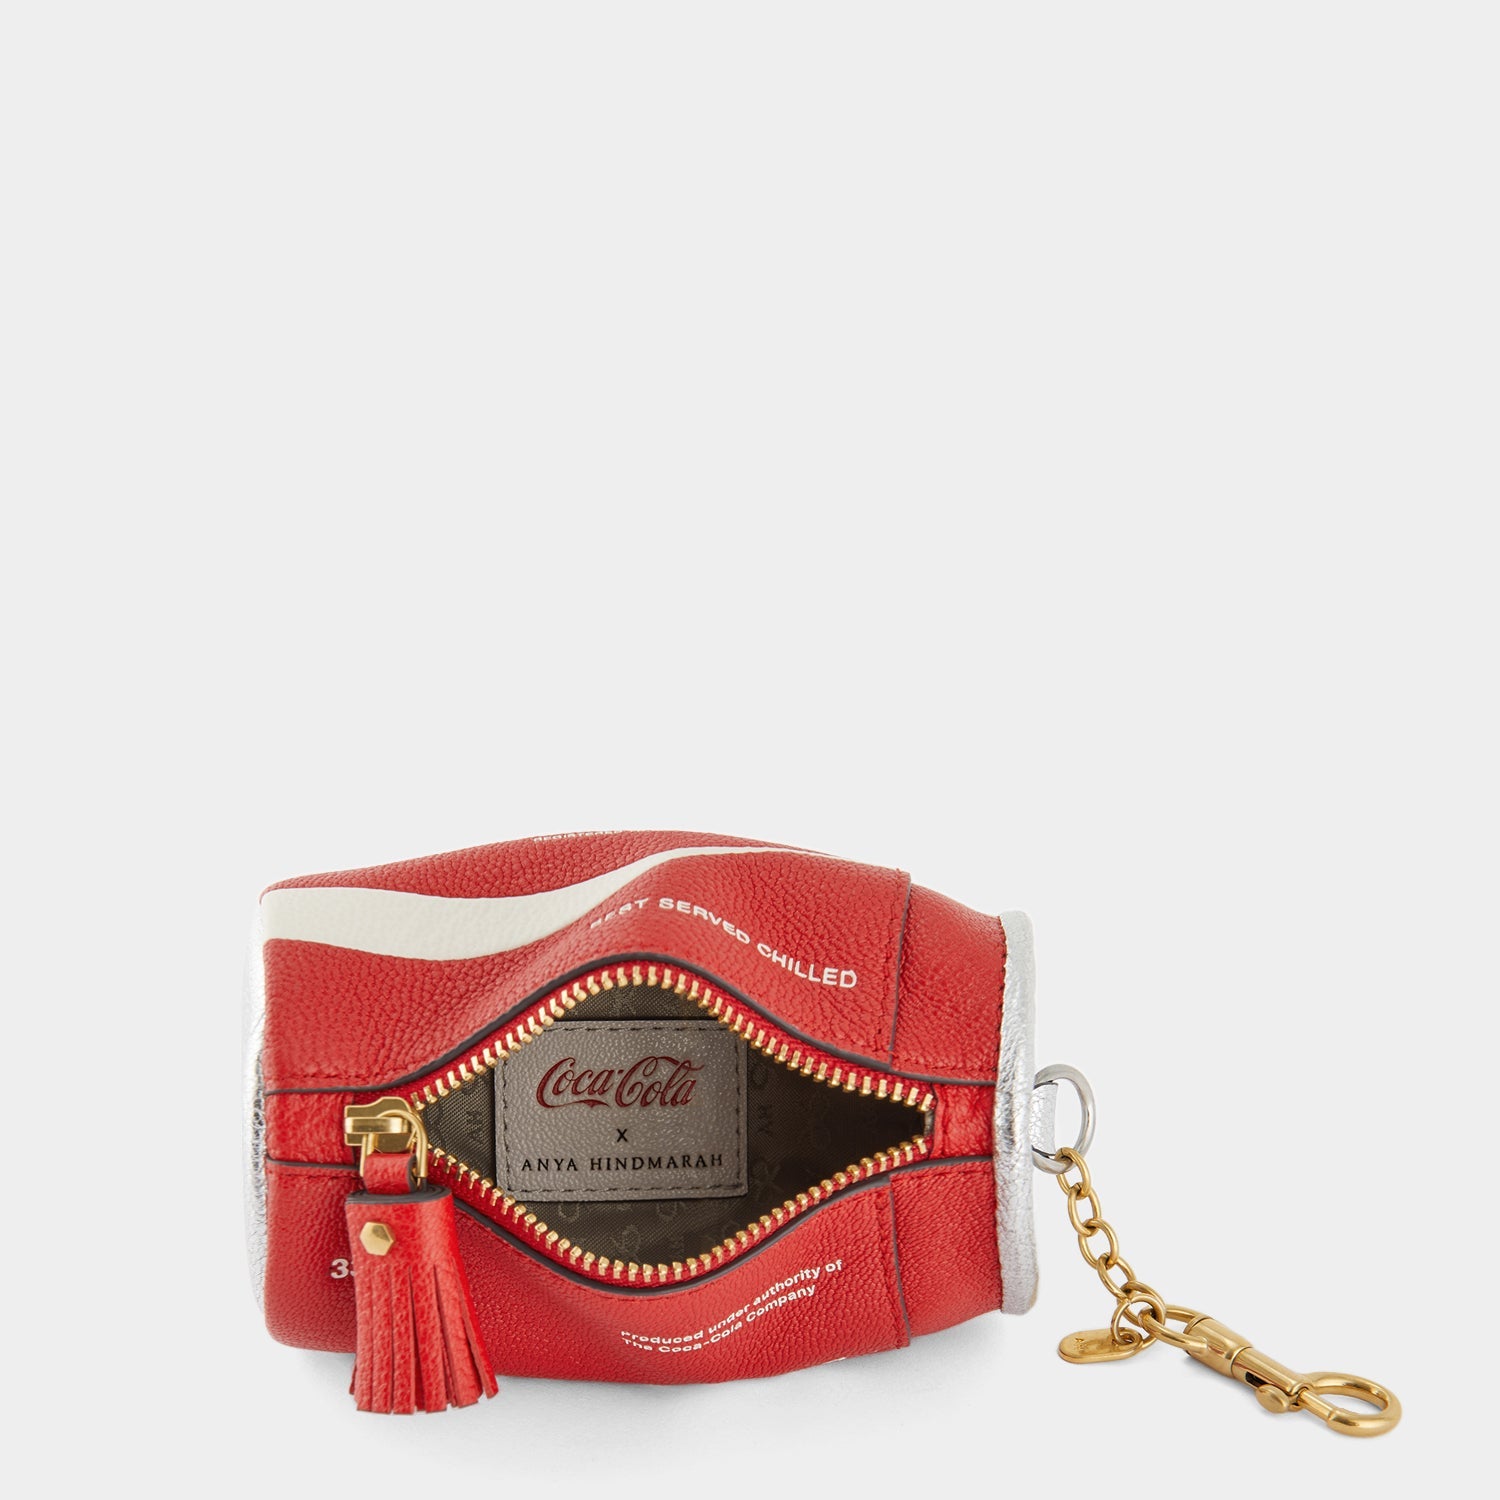 Anya Hindmarch Anya Brands Coca Cola Bright Red Leather Coin Purse Siz